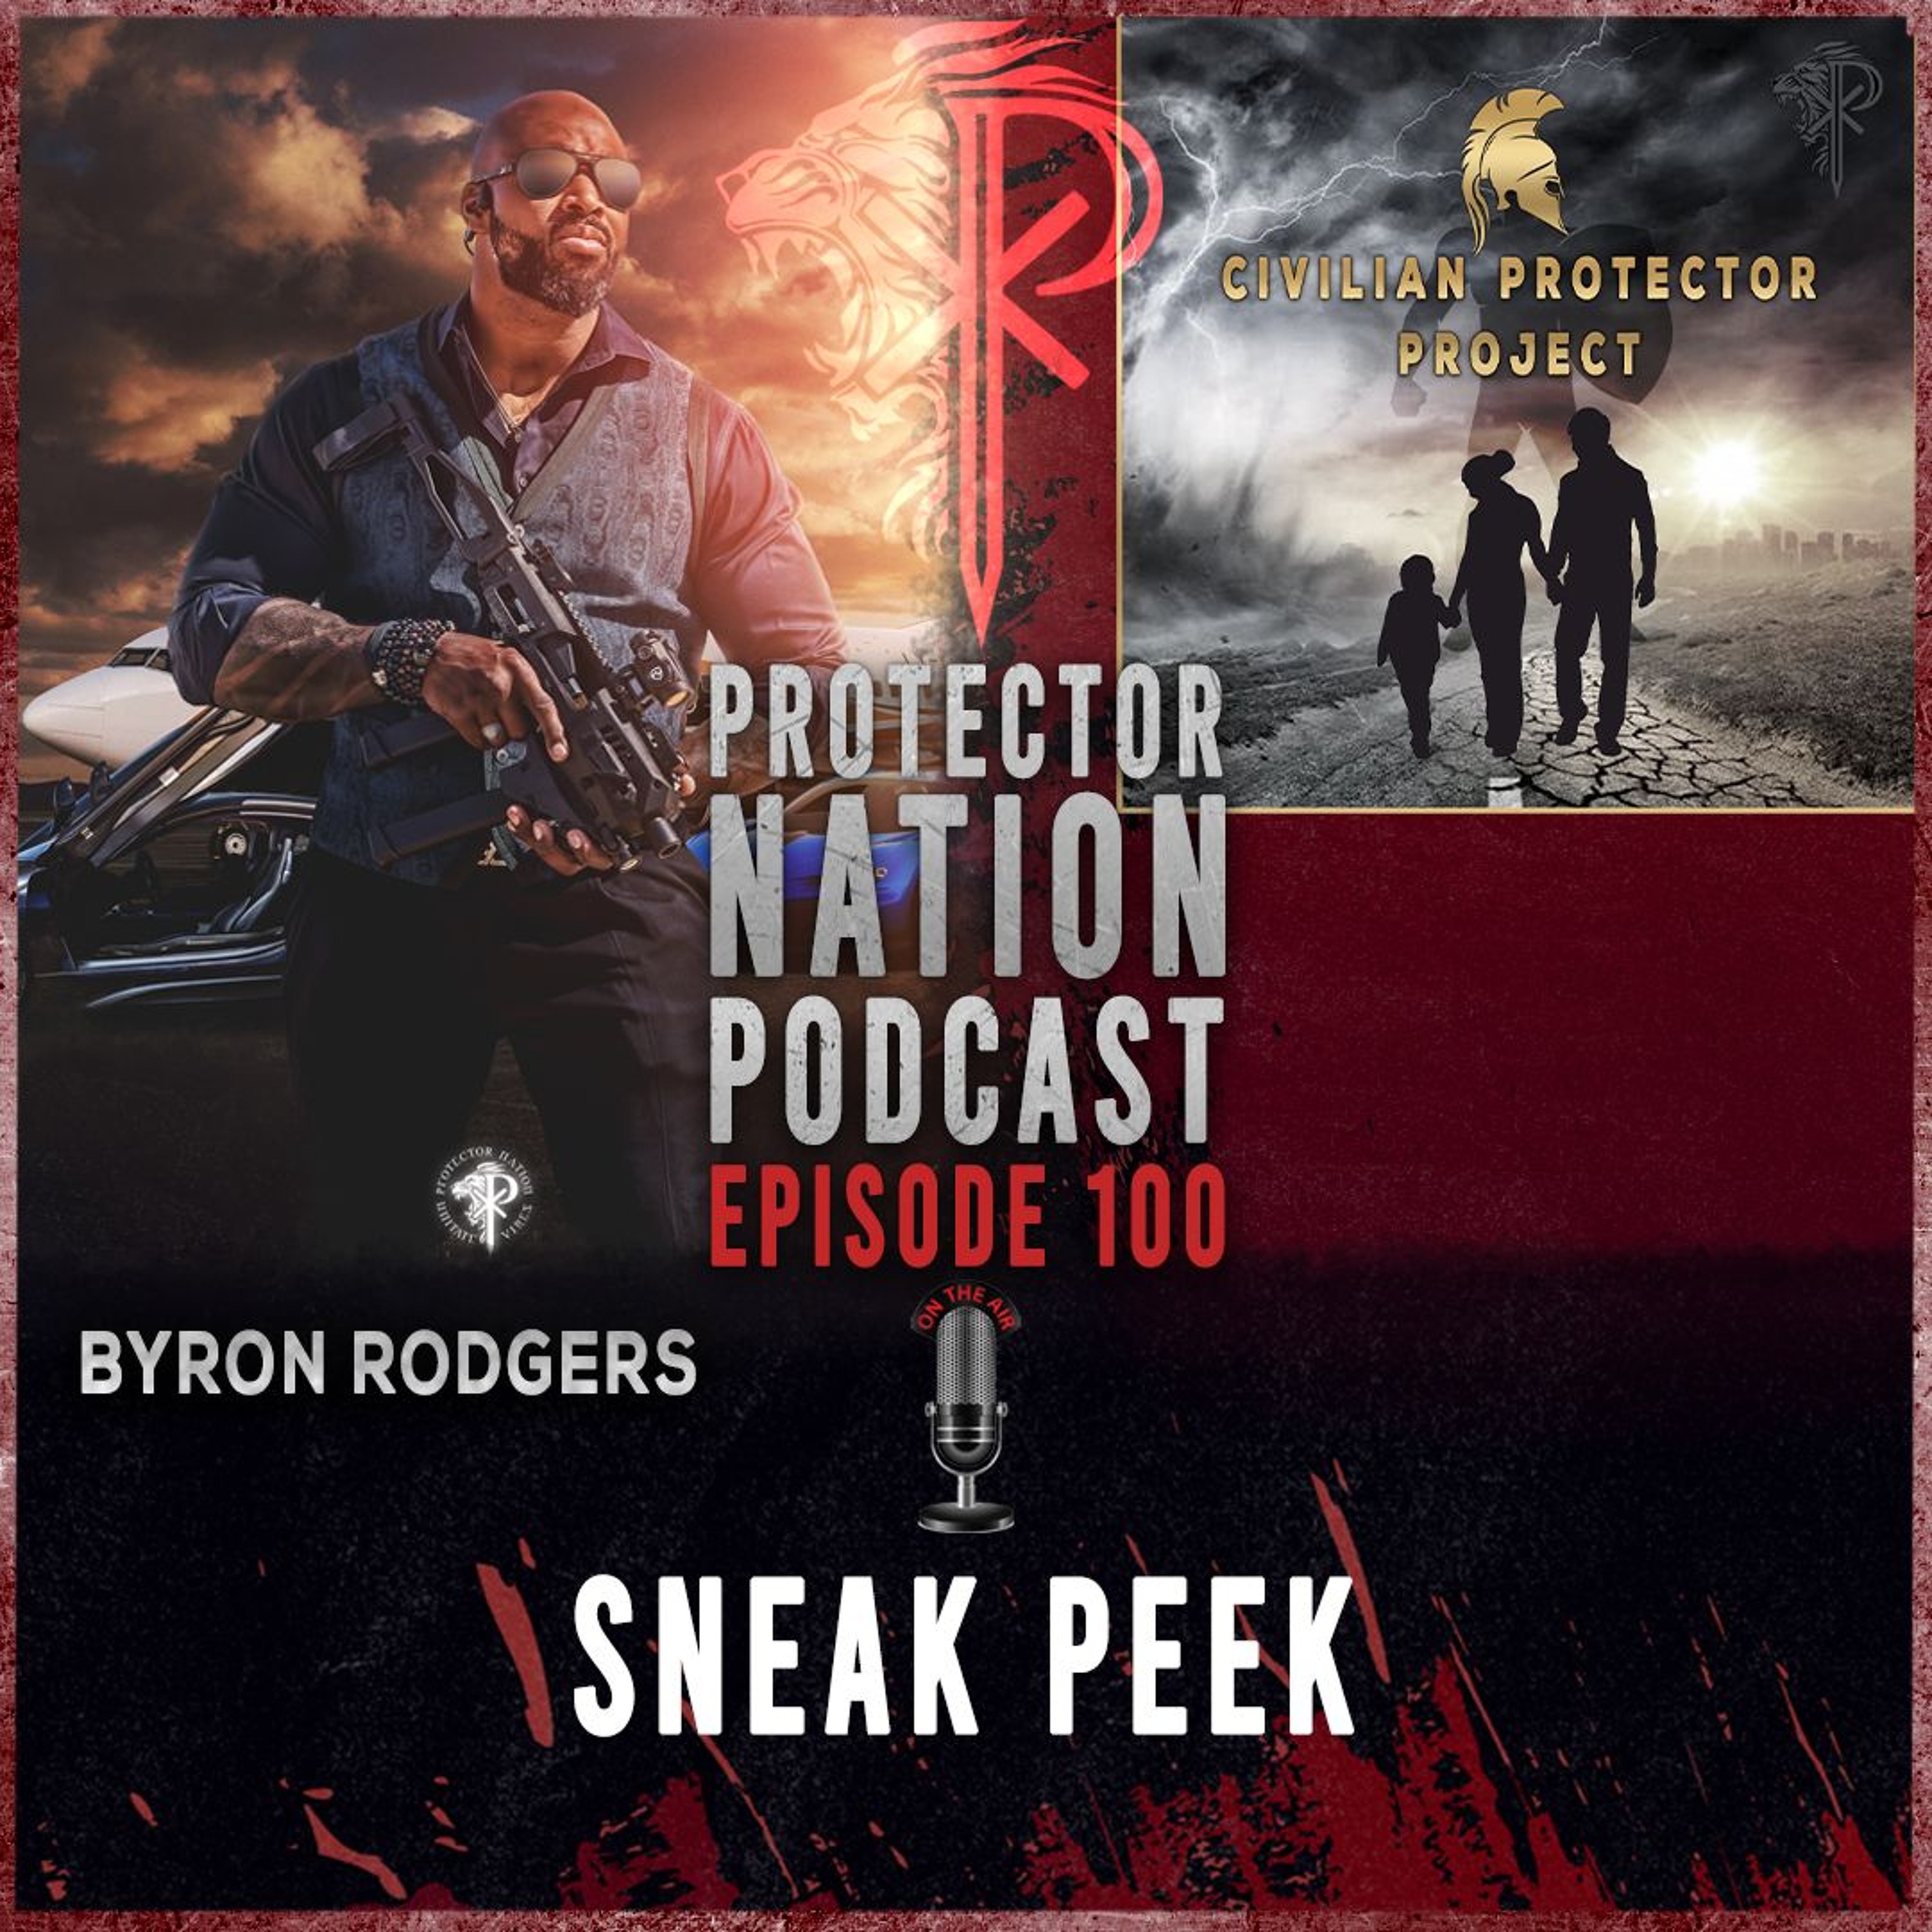 Civilian PROTECTOR Project - Sneak Peek (Protector Nation Podcast 🎙️) EP 100